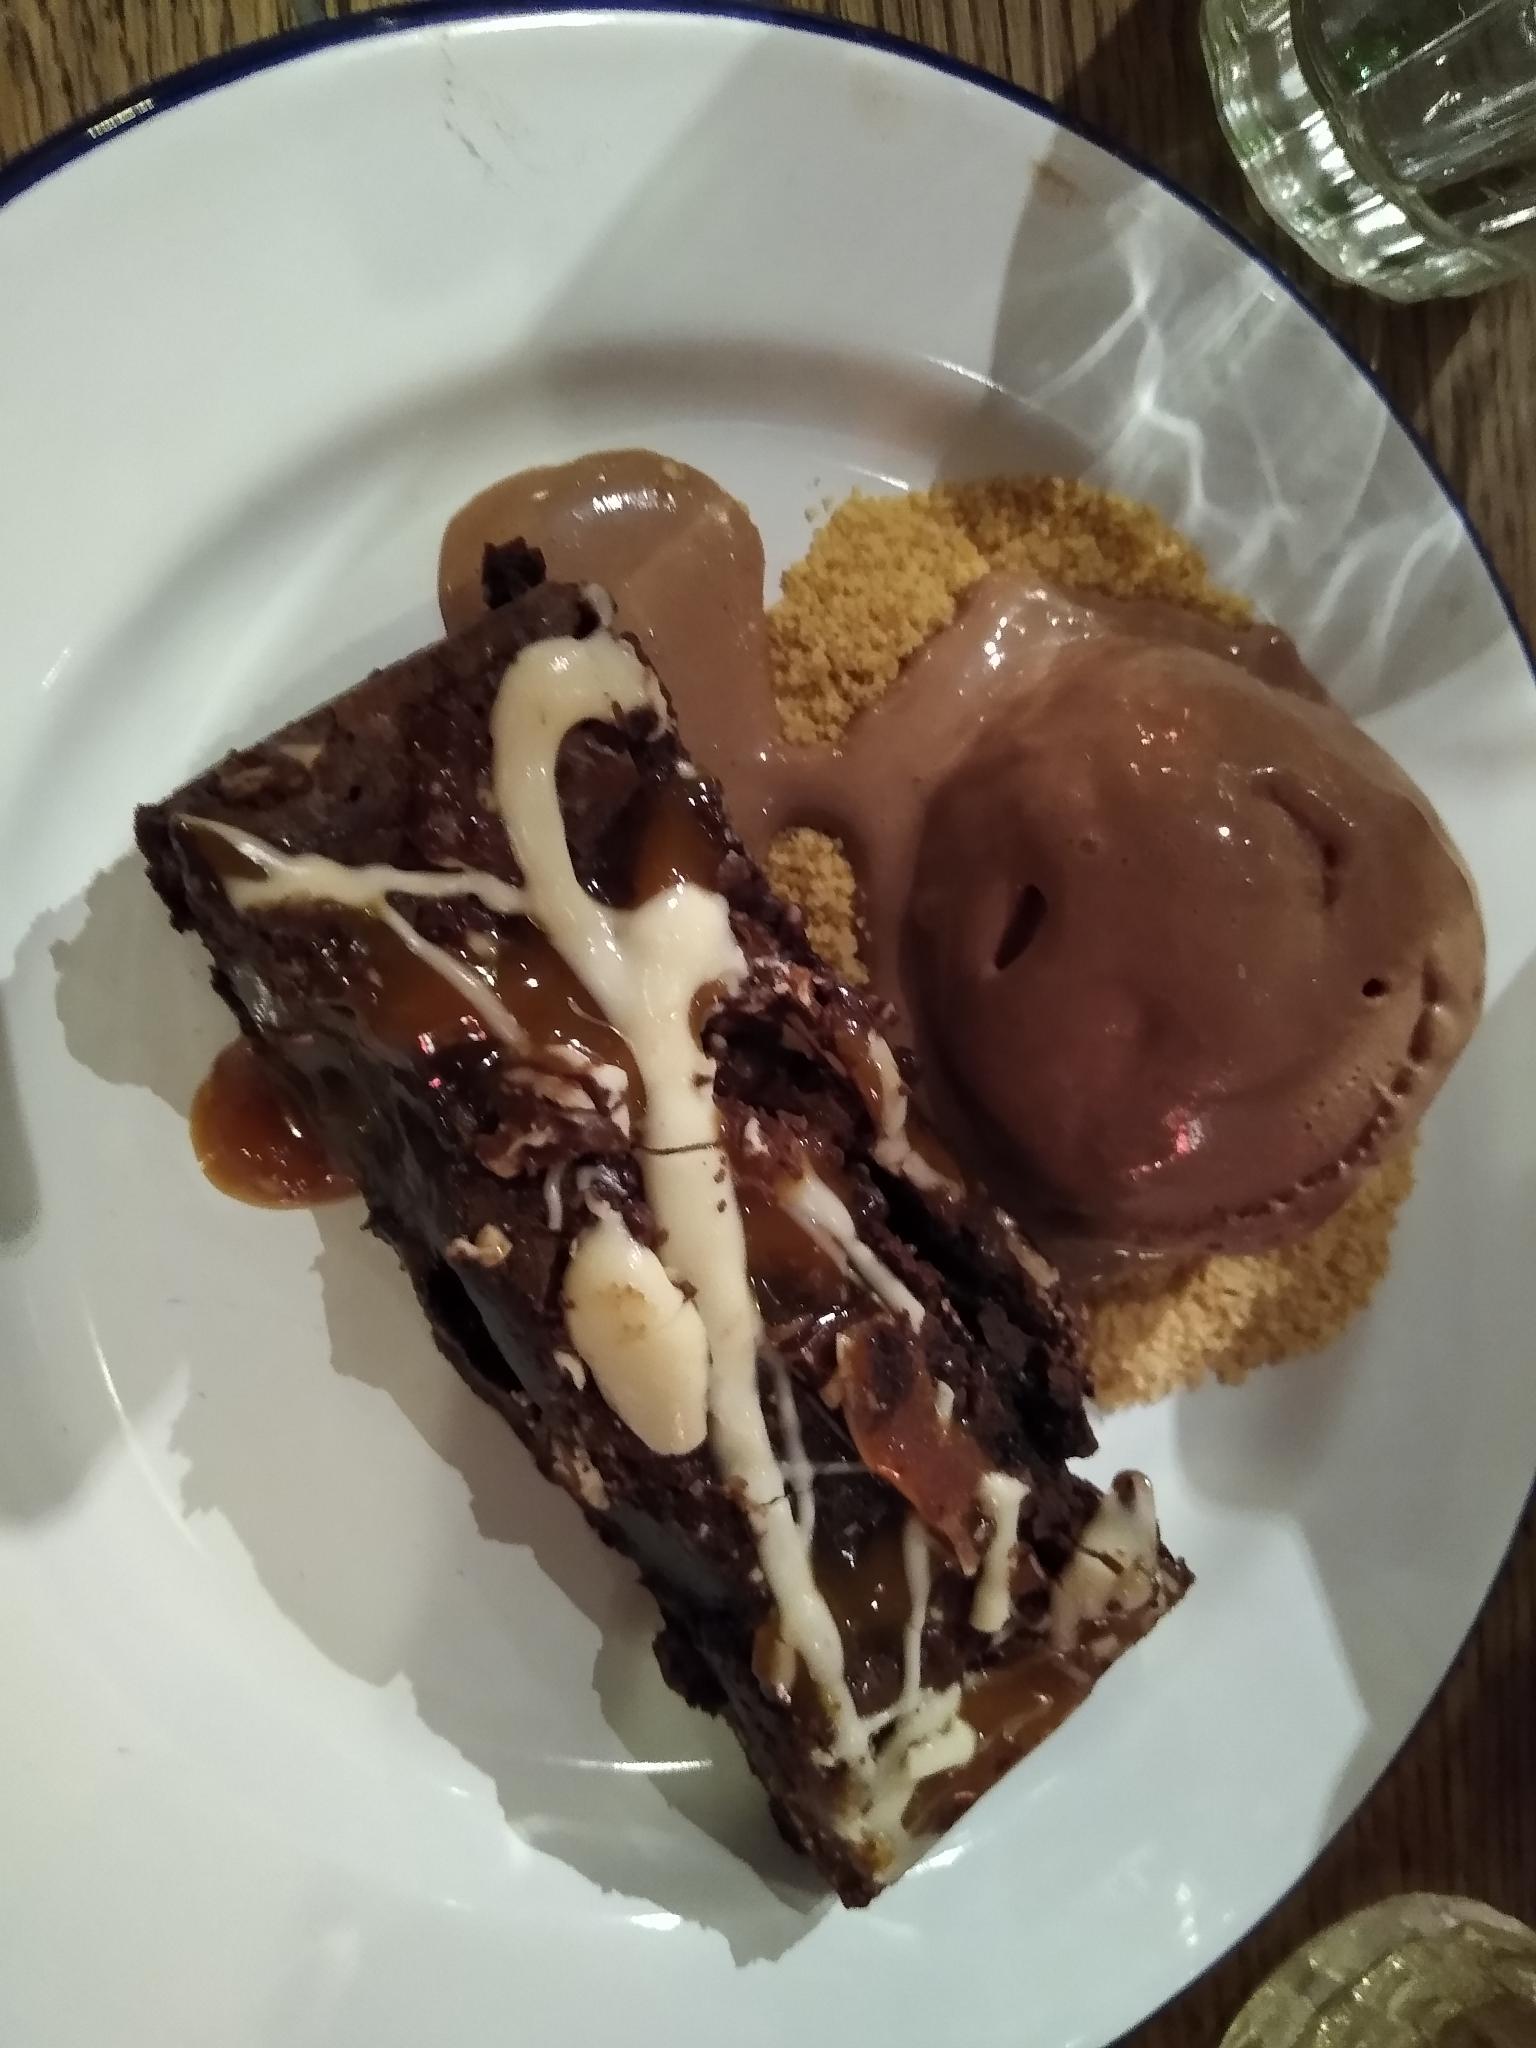 Chocolate fudge peanut brownie with chocolate ice-cream and a biscuit base